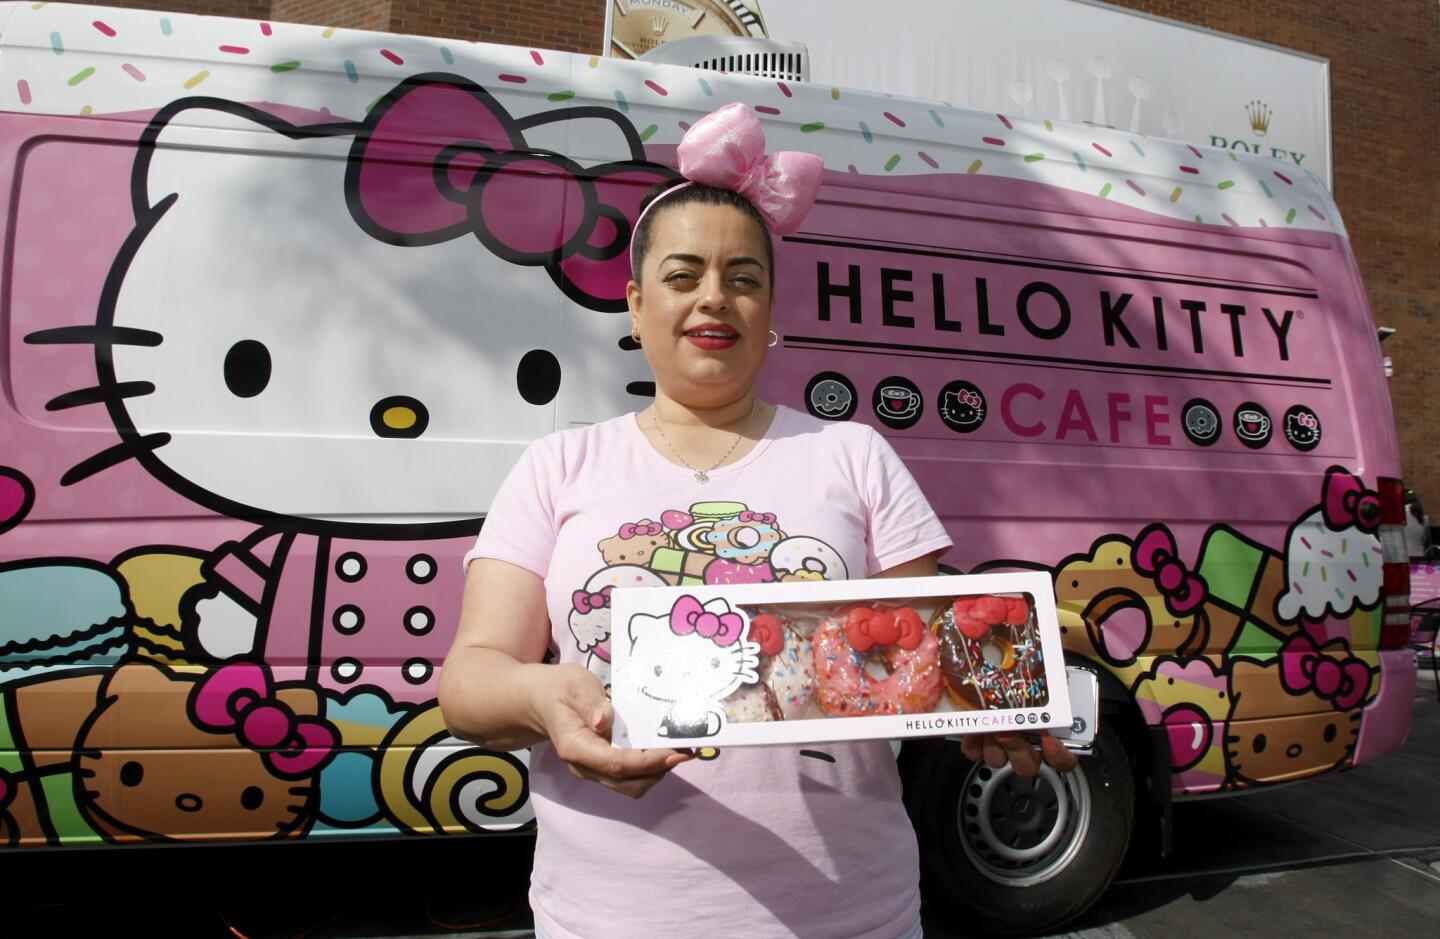 Photo Gallery: Hello Kitty Cafe truck visits Glendale with freshly-made doughnuts